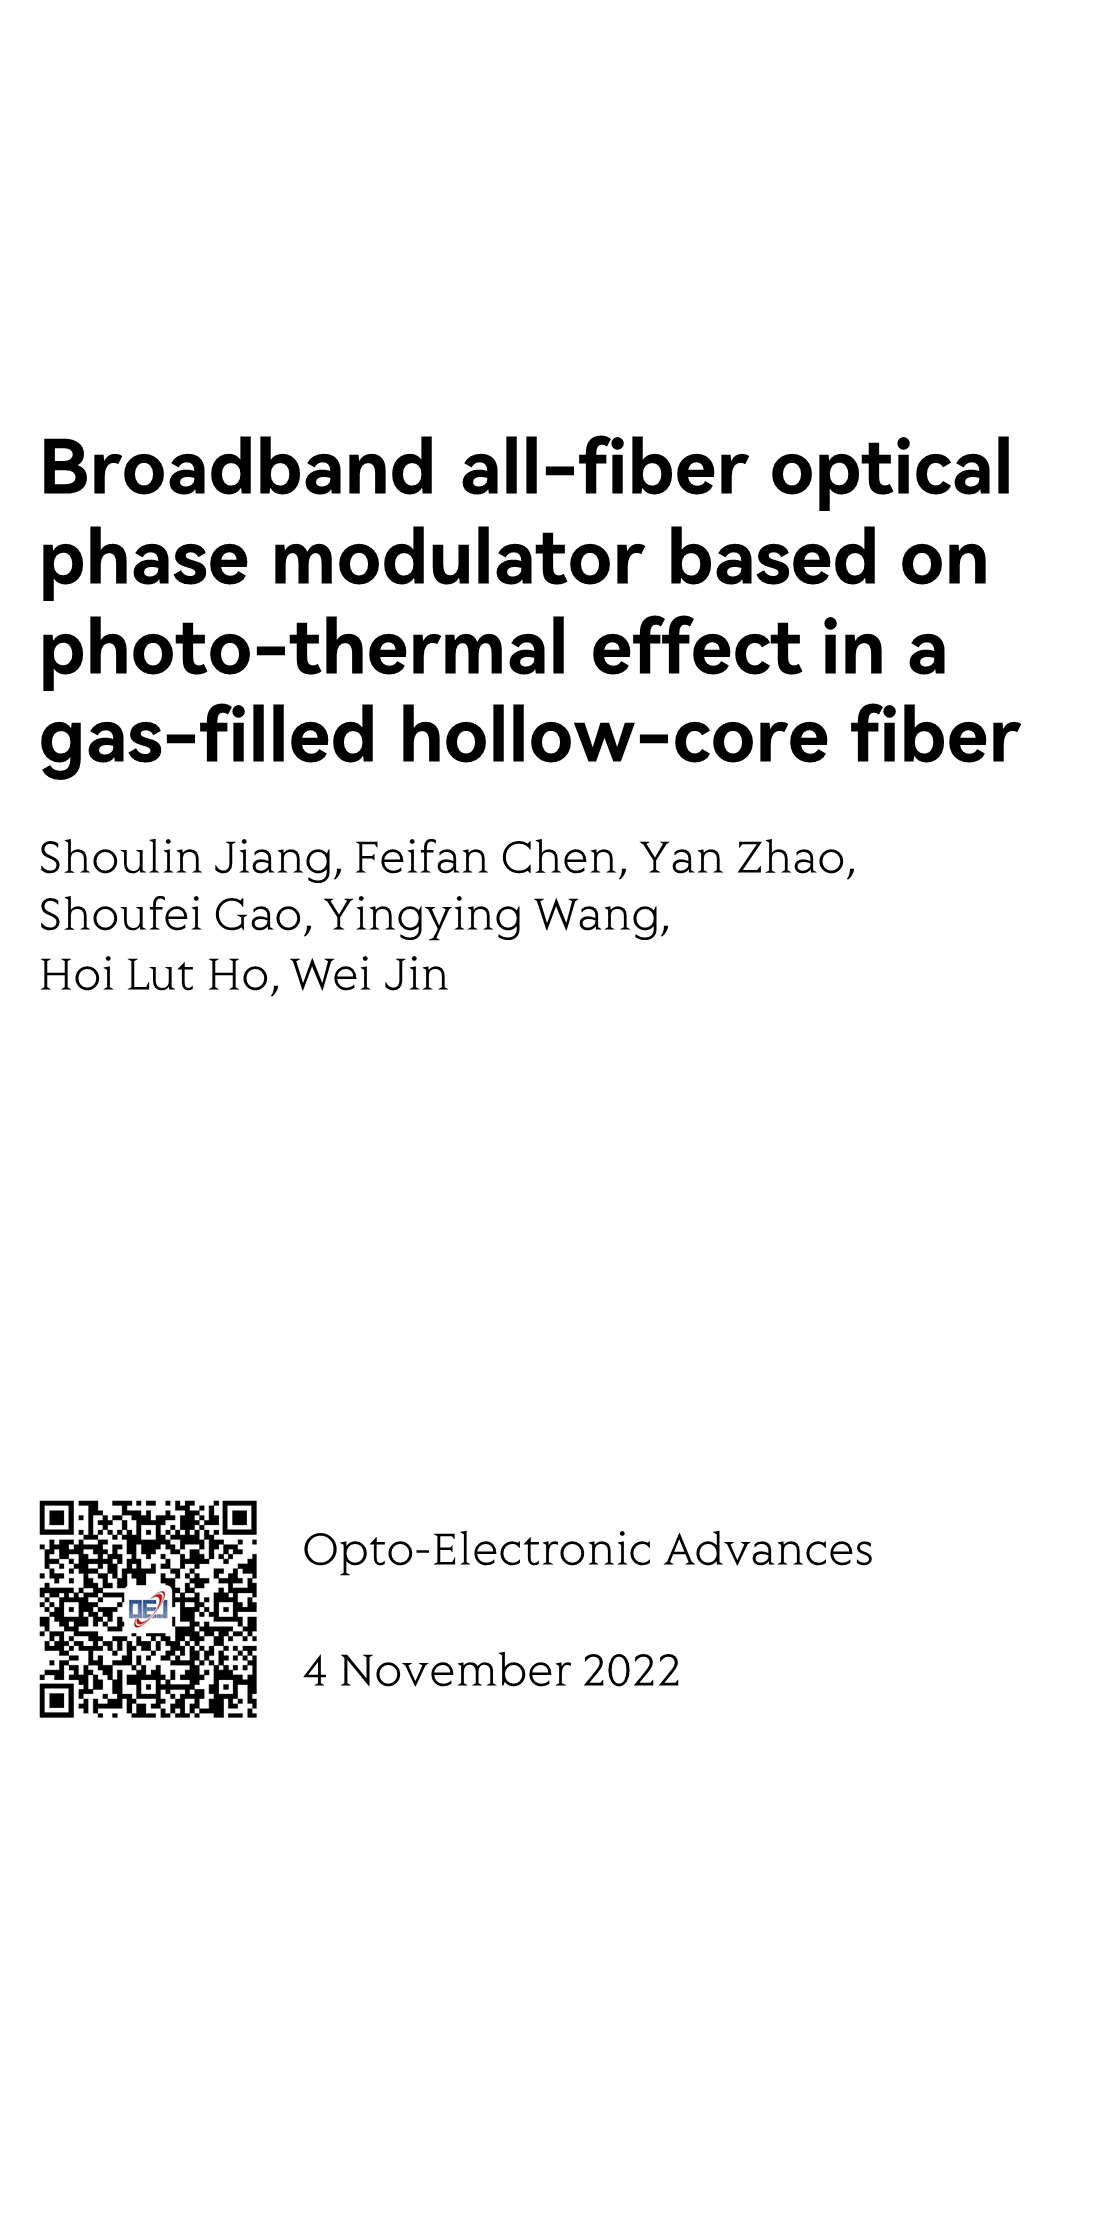 Broadband all-fiber optical phase modulator based on photo-thermal effect in a gas-filled hollow-core fiber_1